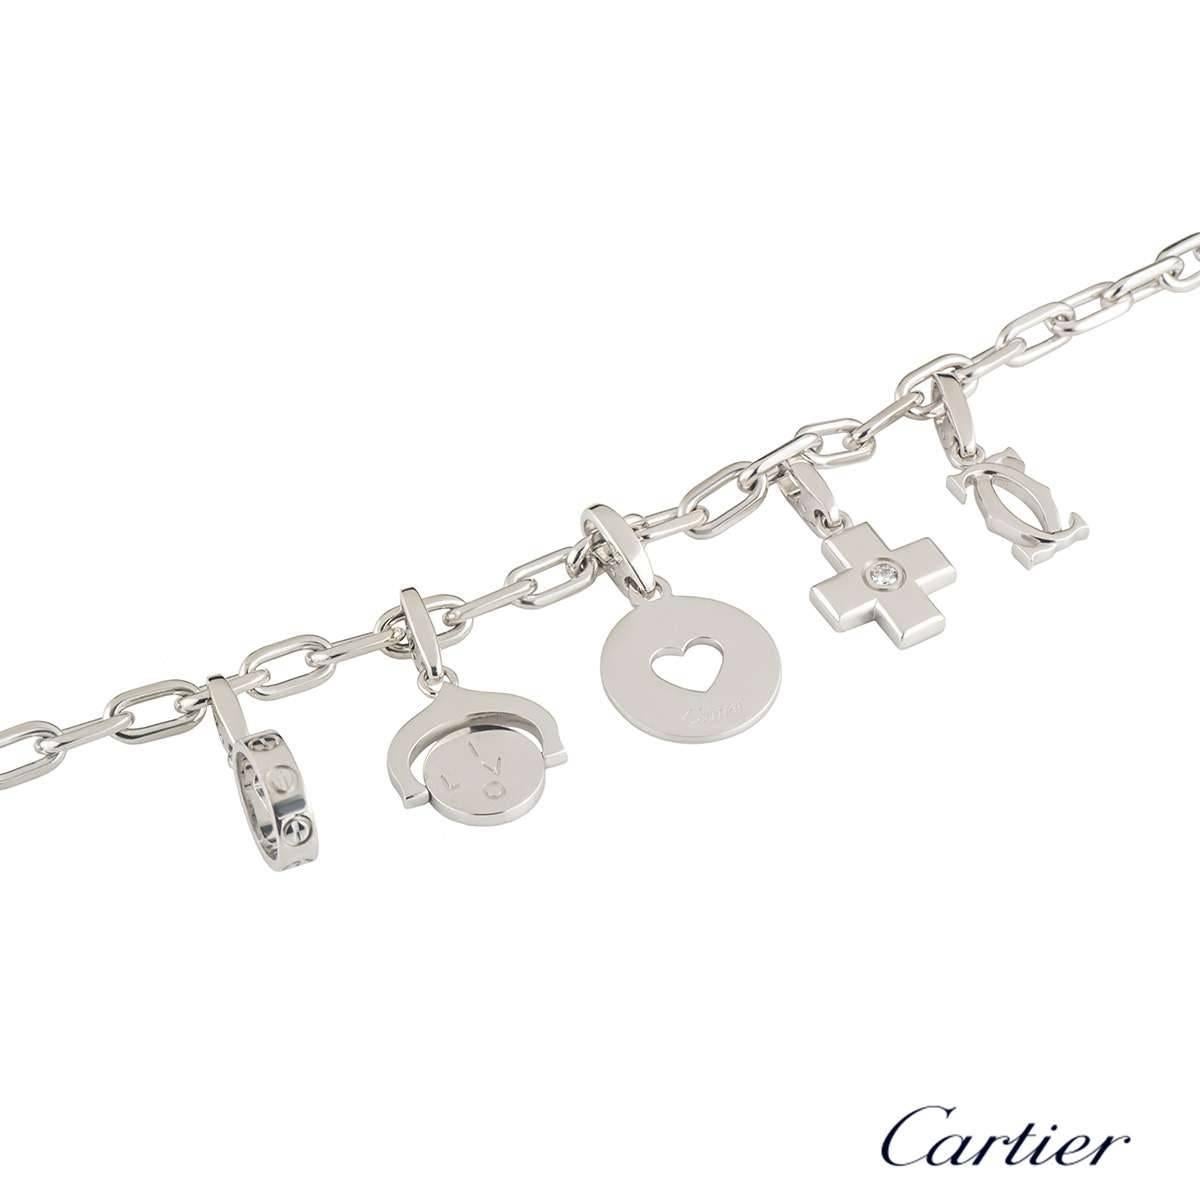 A unique 18k white gold Cartier charm bracelet. The bracelet comprises of a white gold flat cable chain with 5 Cartier charms. The first charm is a circular motif hanging off an anchored bail with letters on either side, spelling out 'I LOVE YOU'.